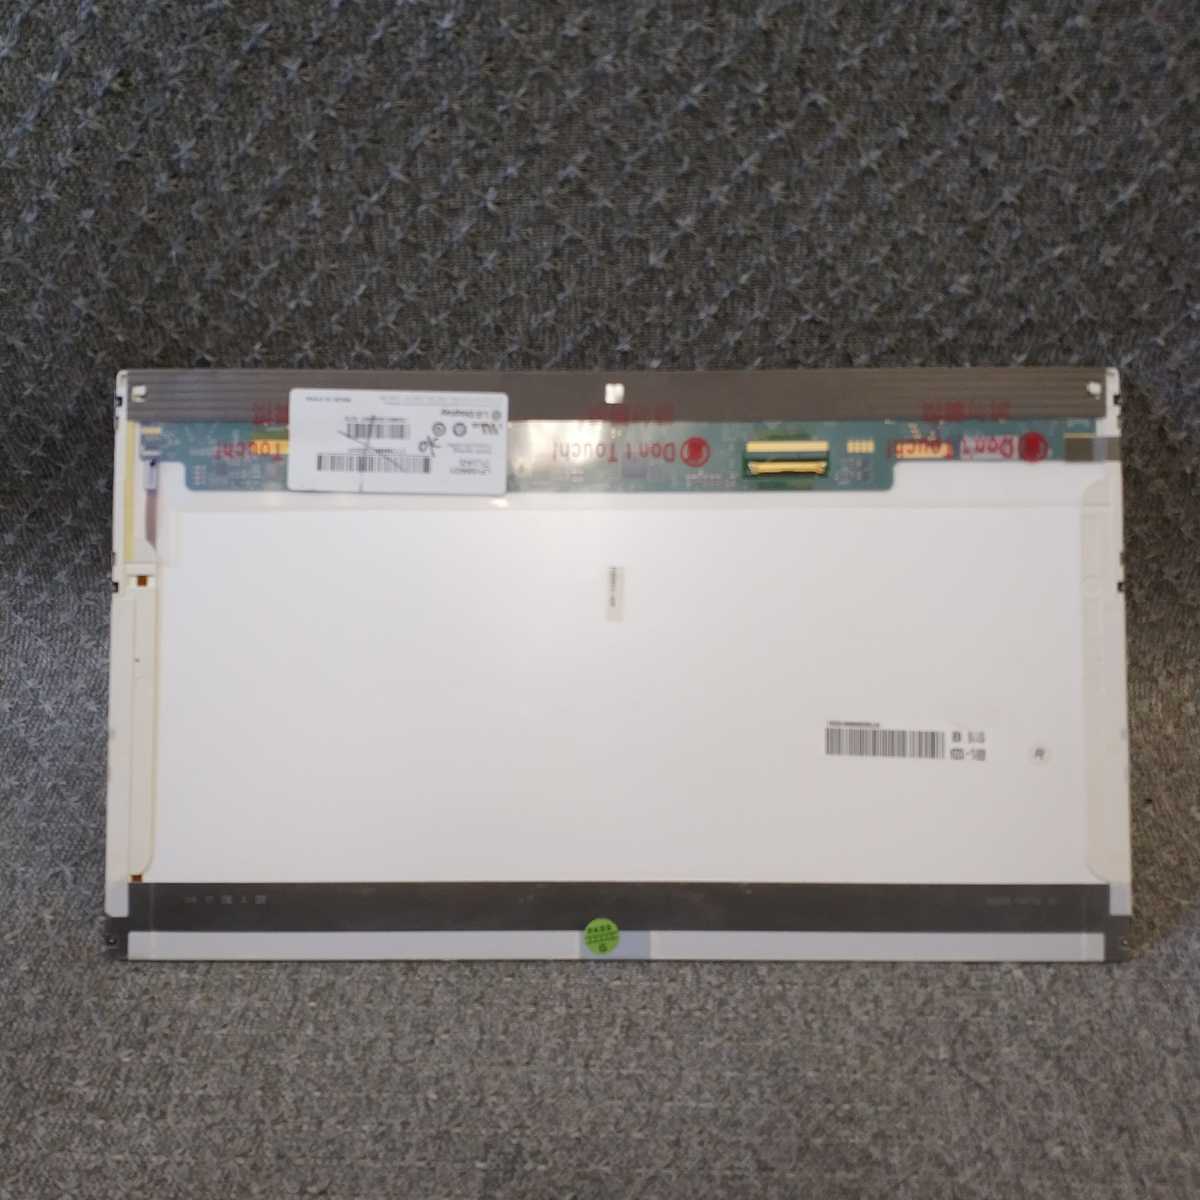  Gifu the same day departure special delivery * 15.6 inch liquid crystal panel * LG Display LP156WD1 (TL)(A2) 1600x900 lustre used * operation verification settled E312